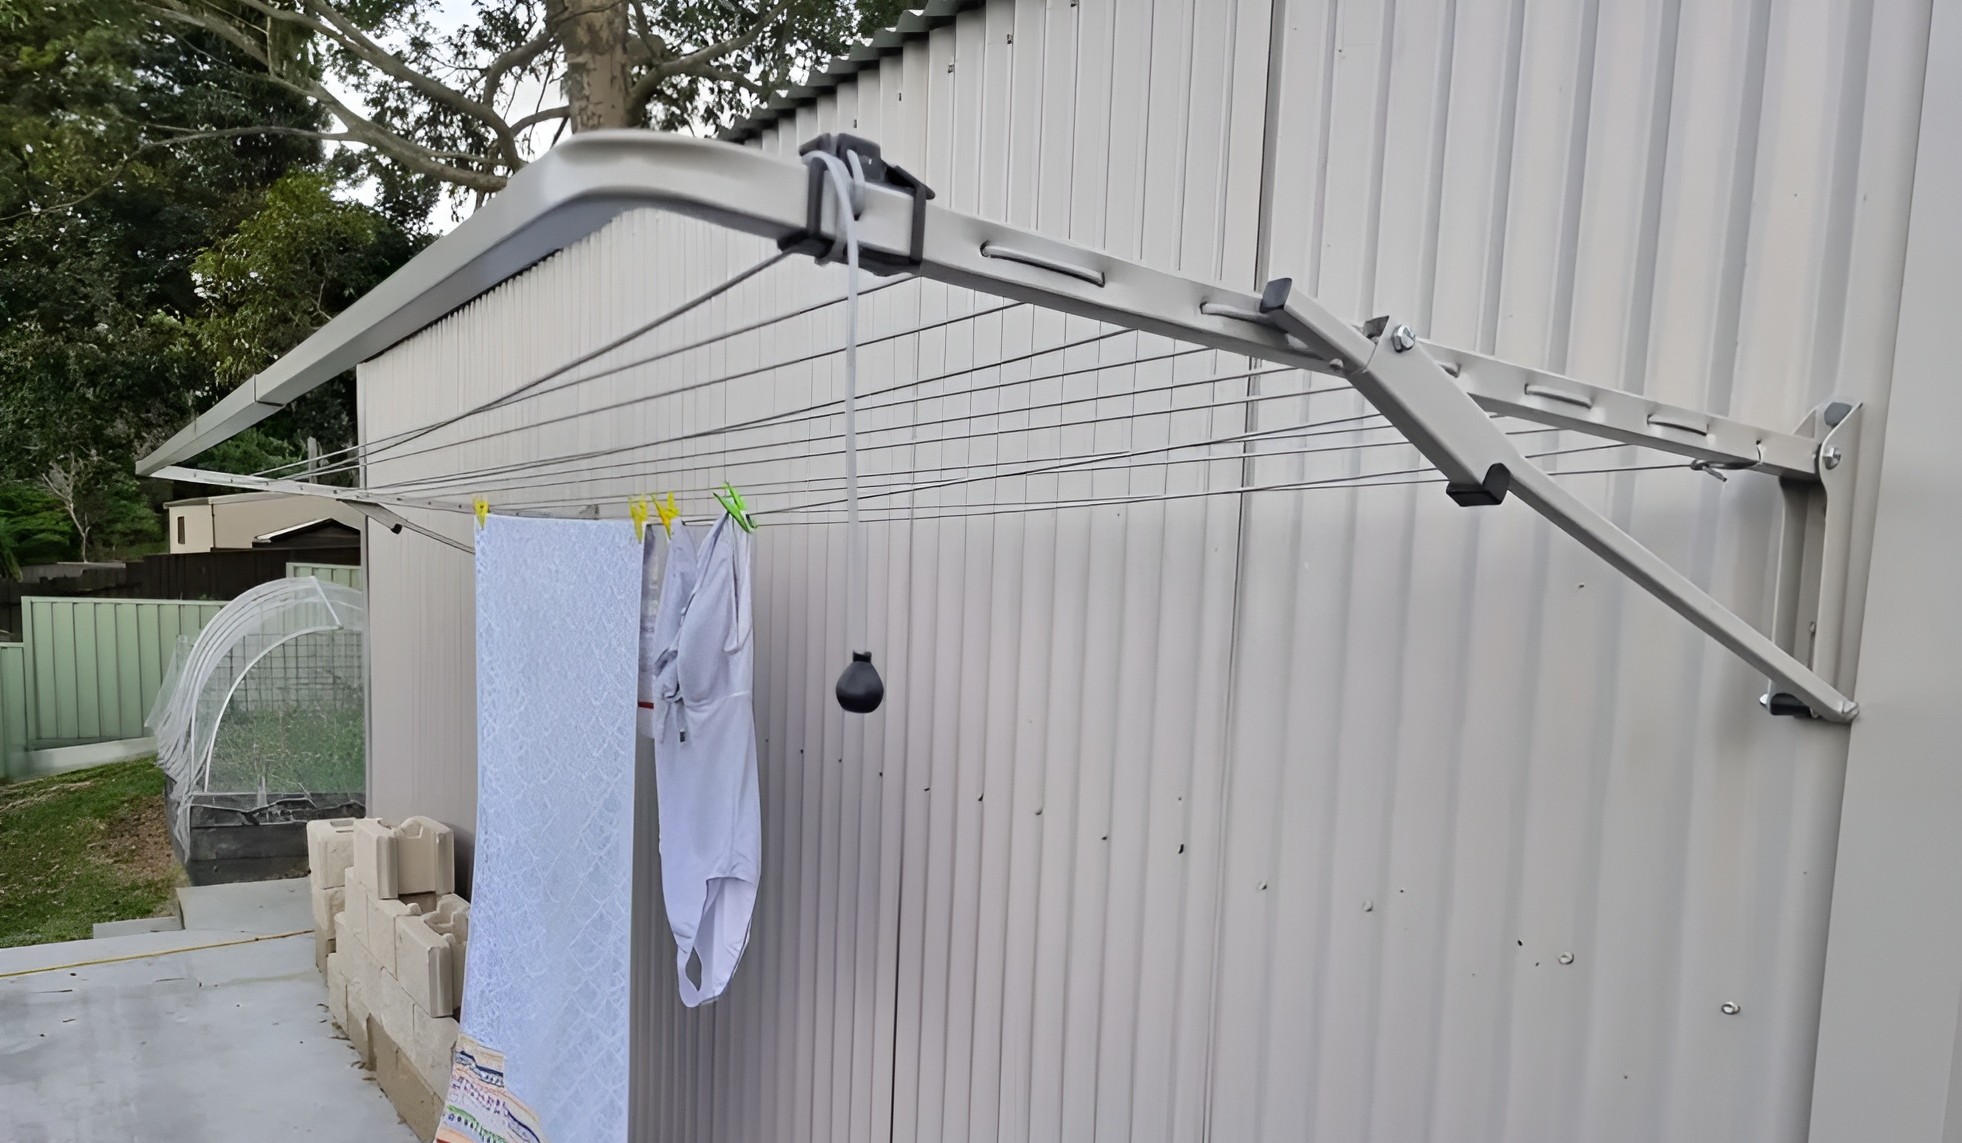 Foldable Clothesline The Ultimate Guide to Australia's Top 8 Foldable Clotheslines